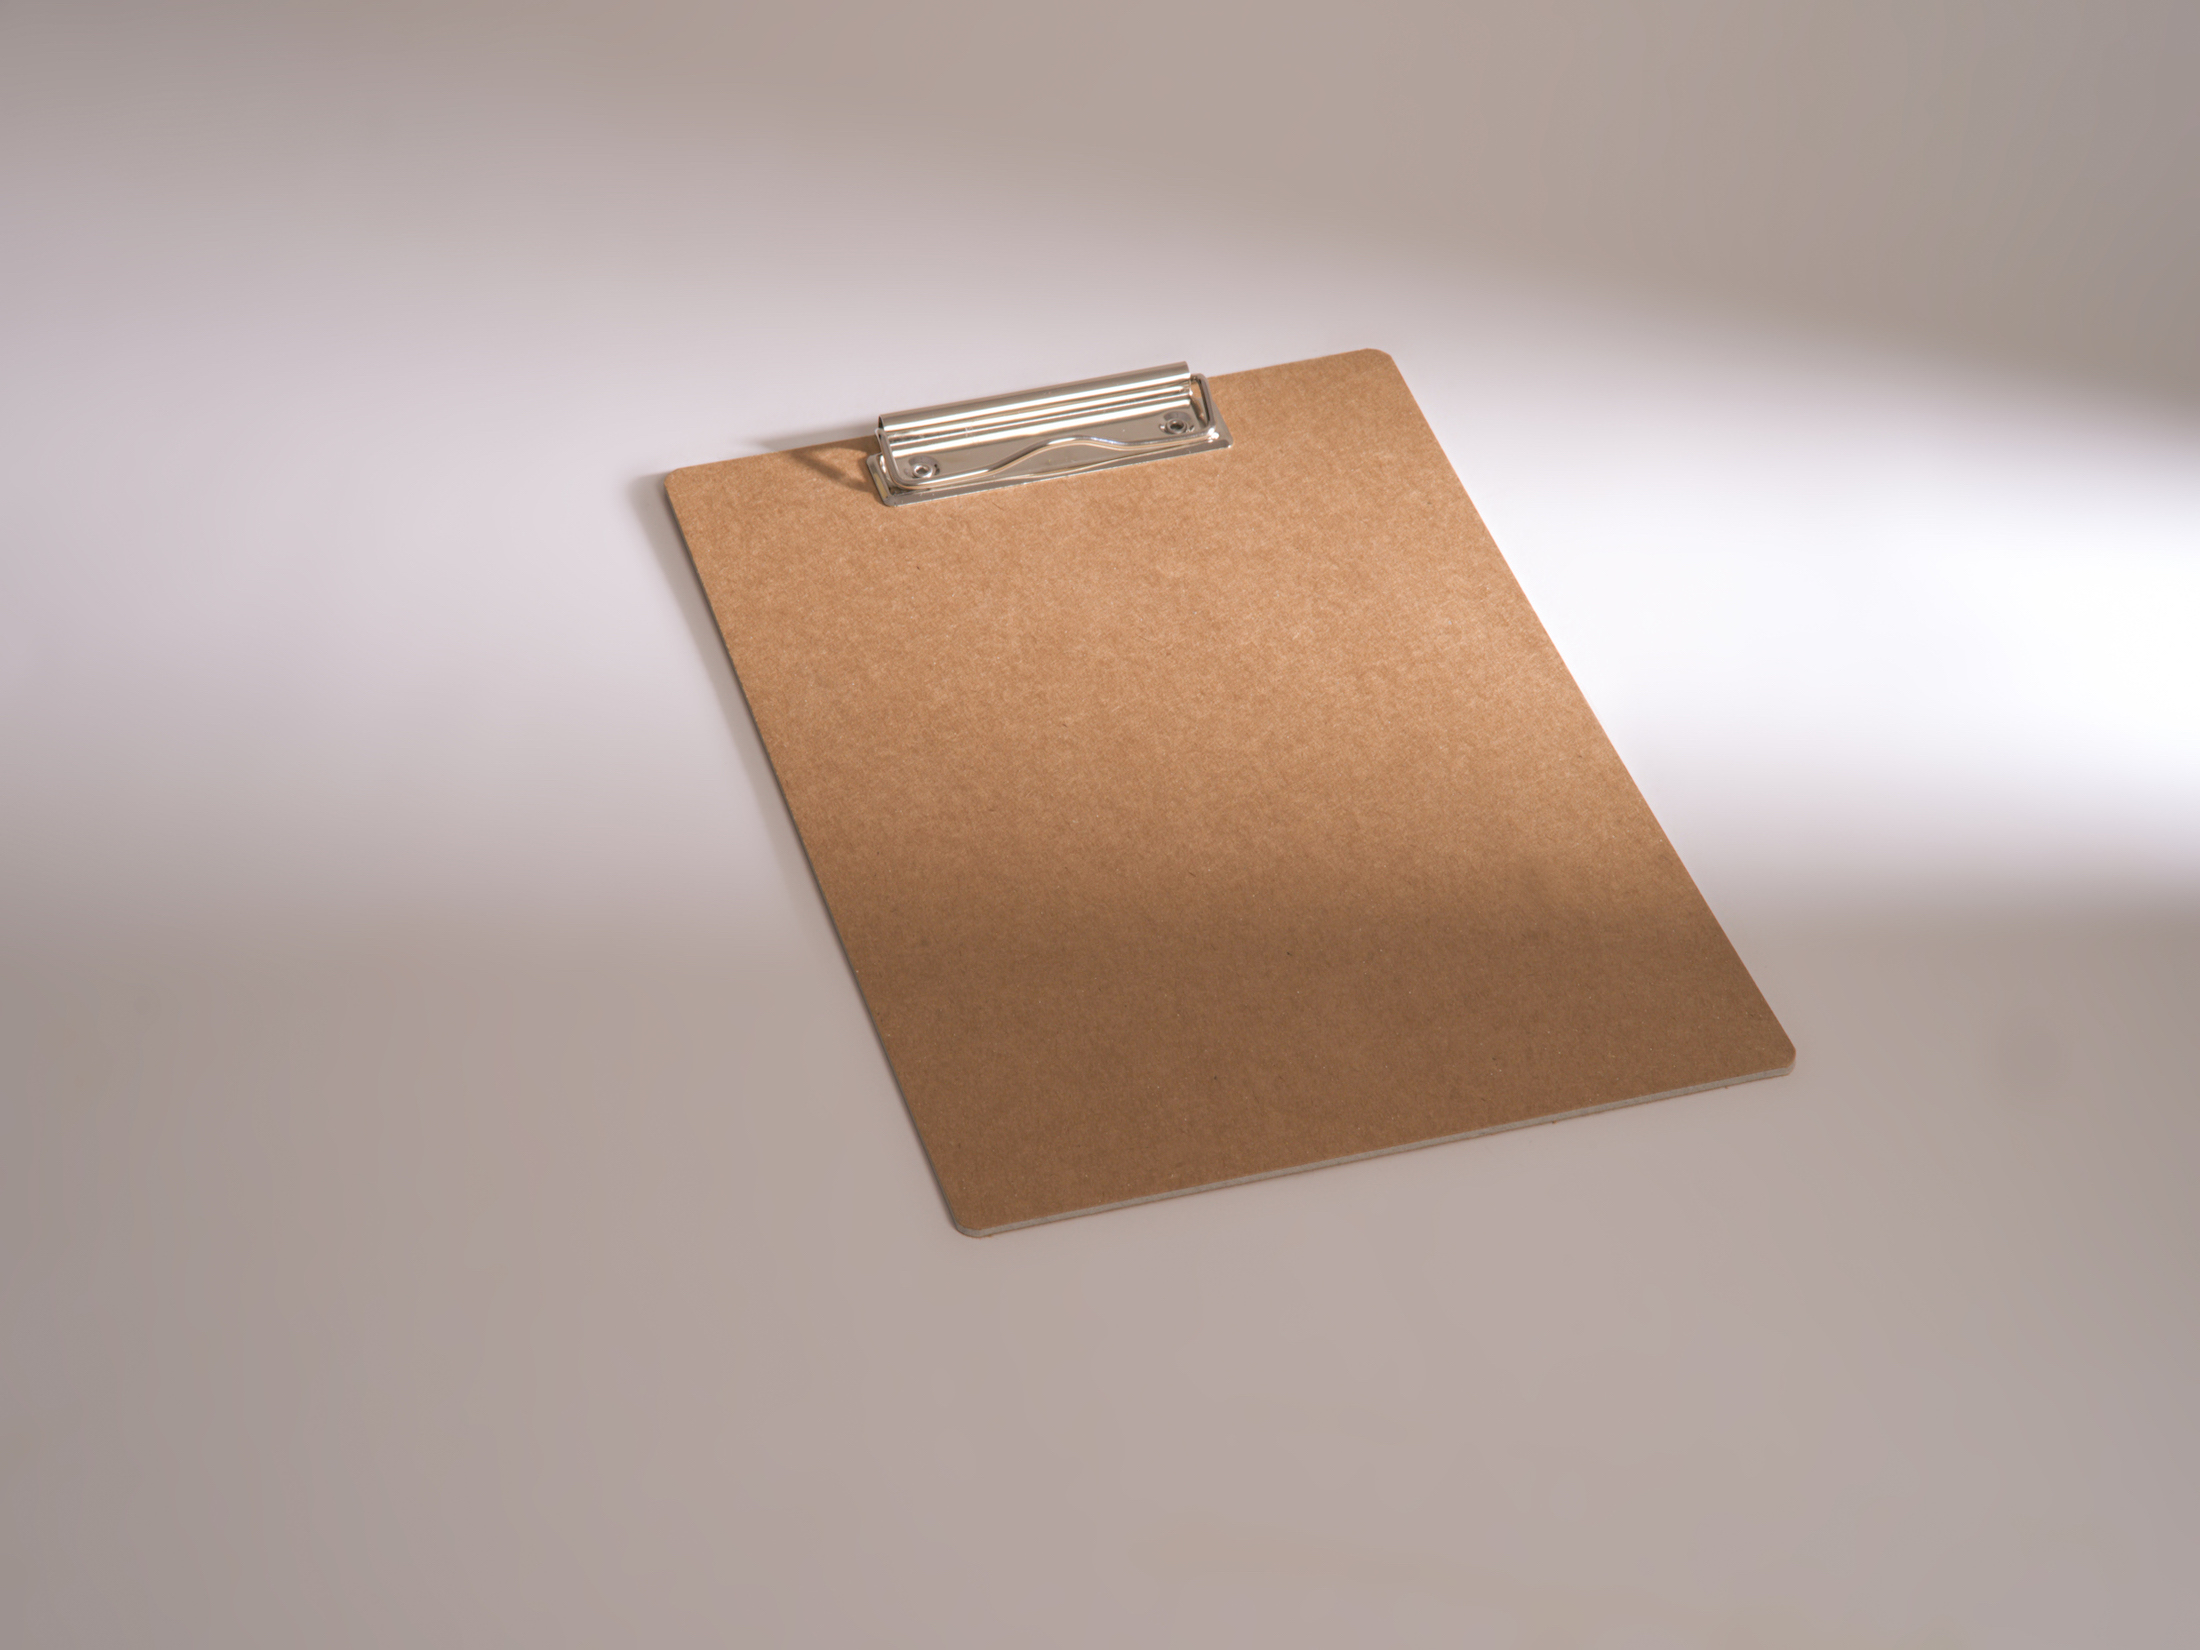 Sturdy clipboard made of recycled cardboard with embossed ROTERFADEN logo: Suitable for A4 format and Taschenbegleiter in size L.